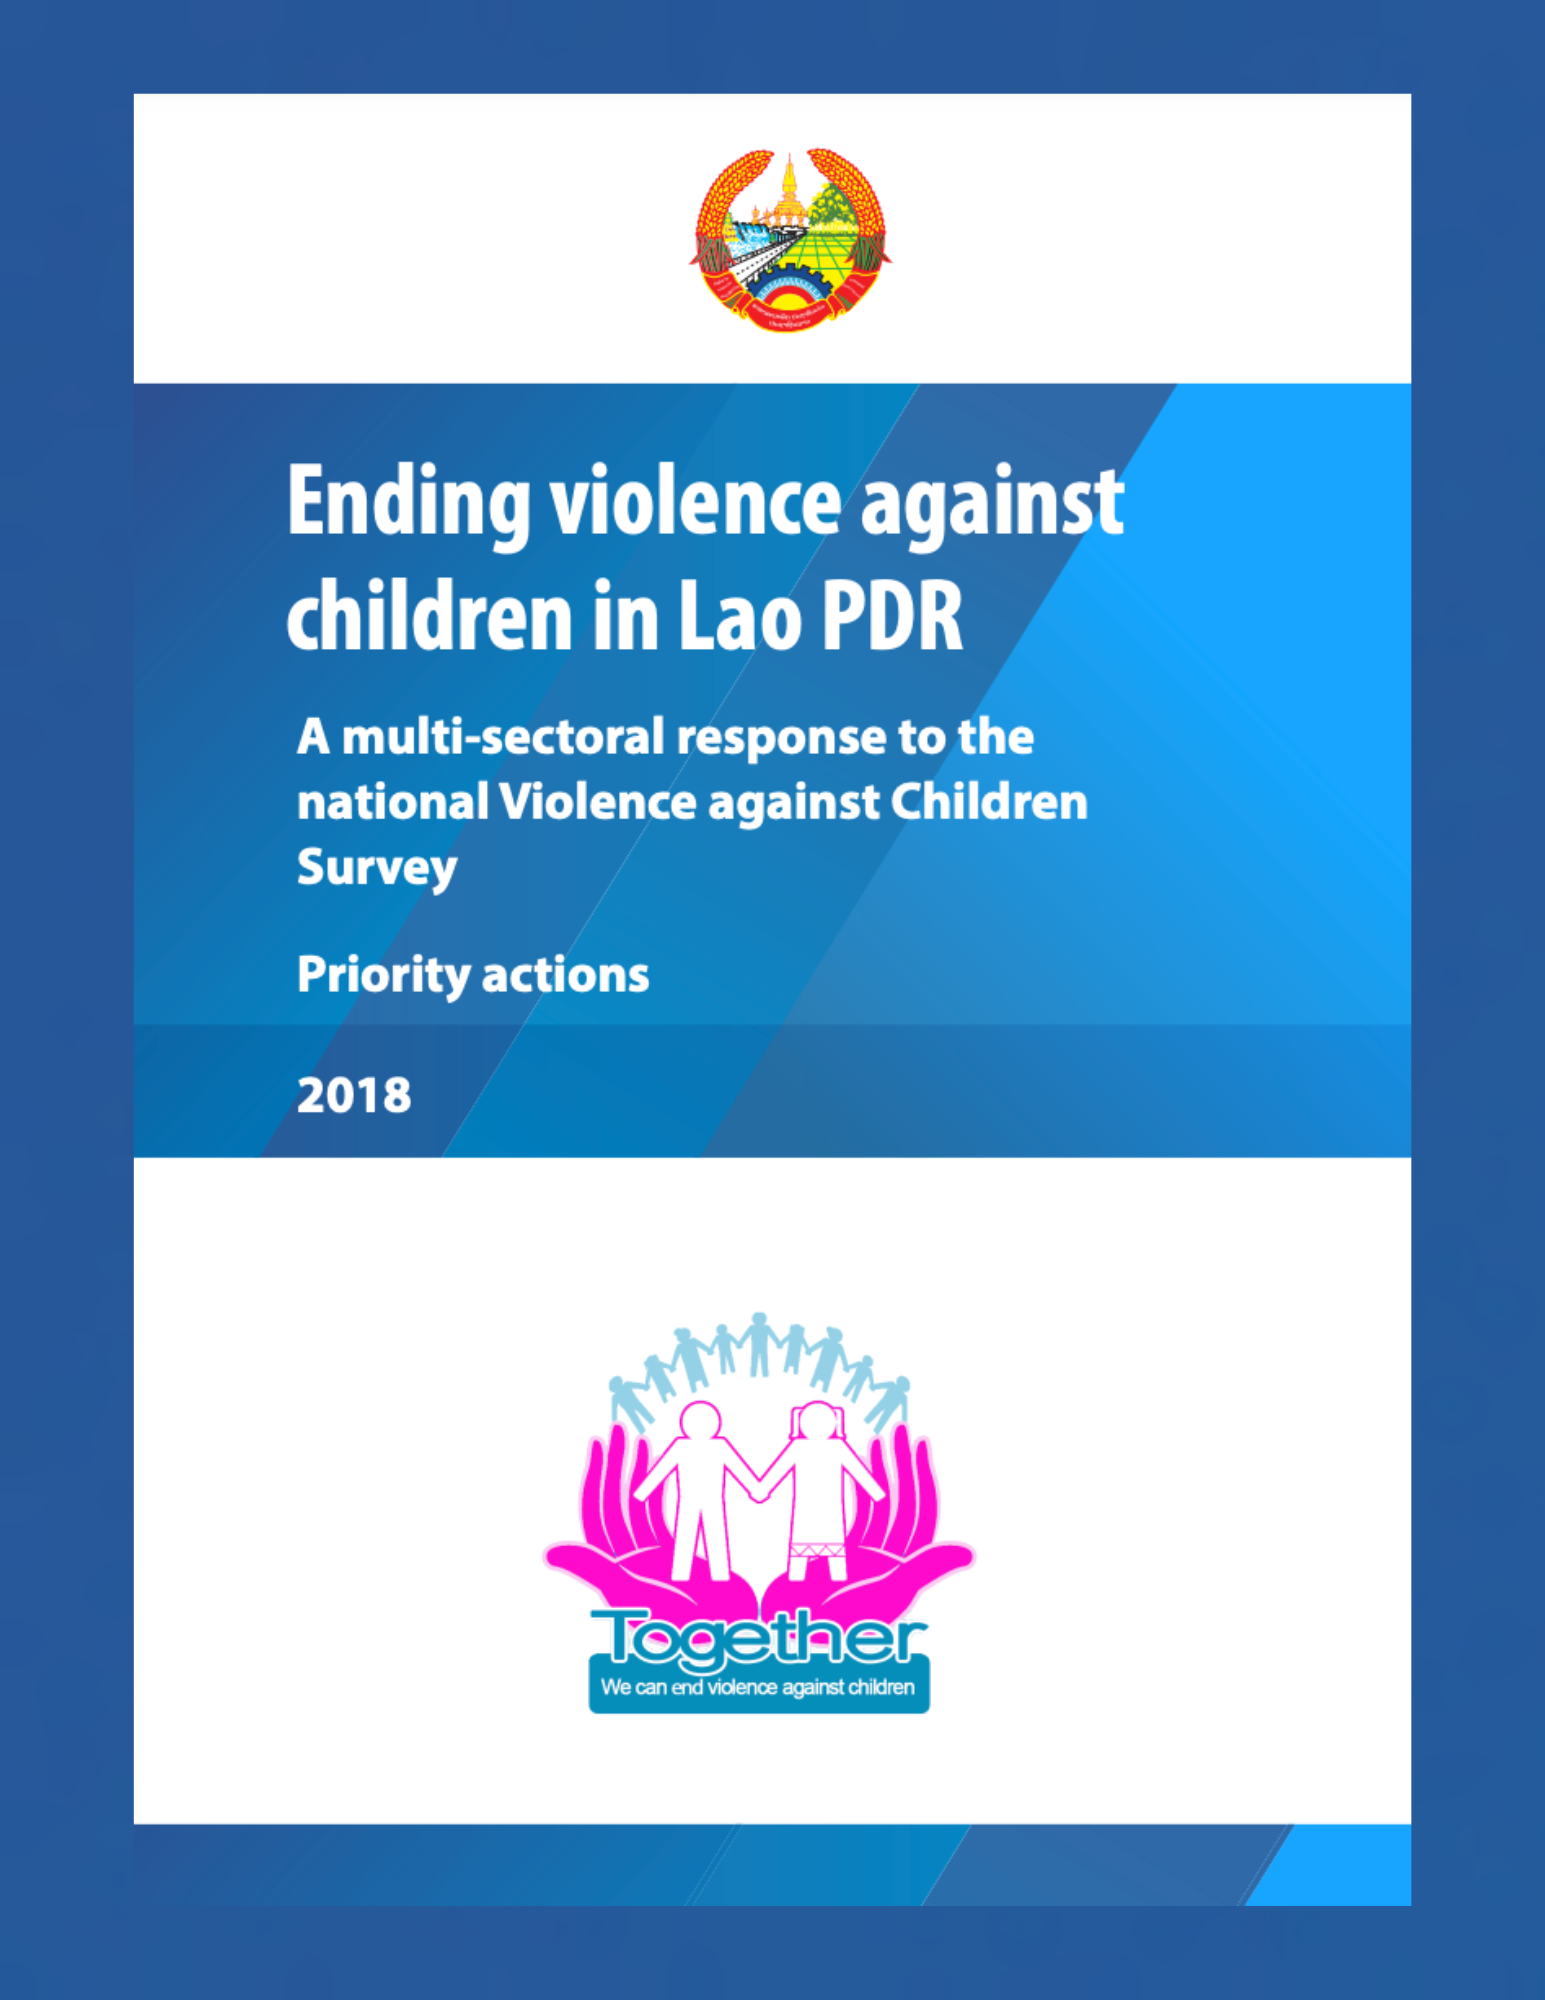 Priority actions ending VAC in Lao PDR 2018